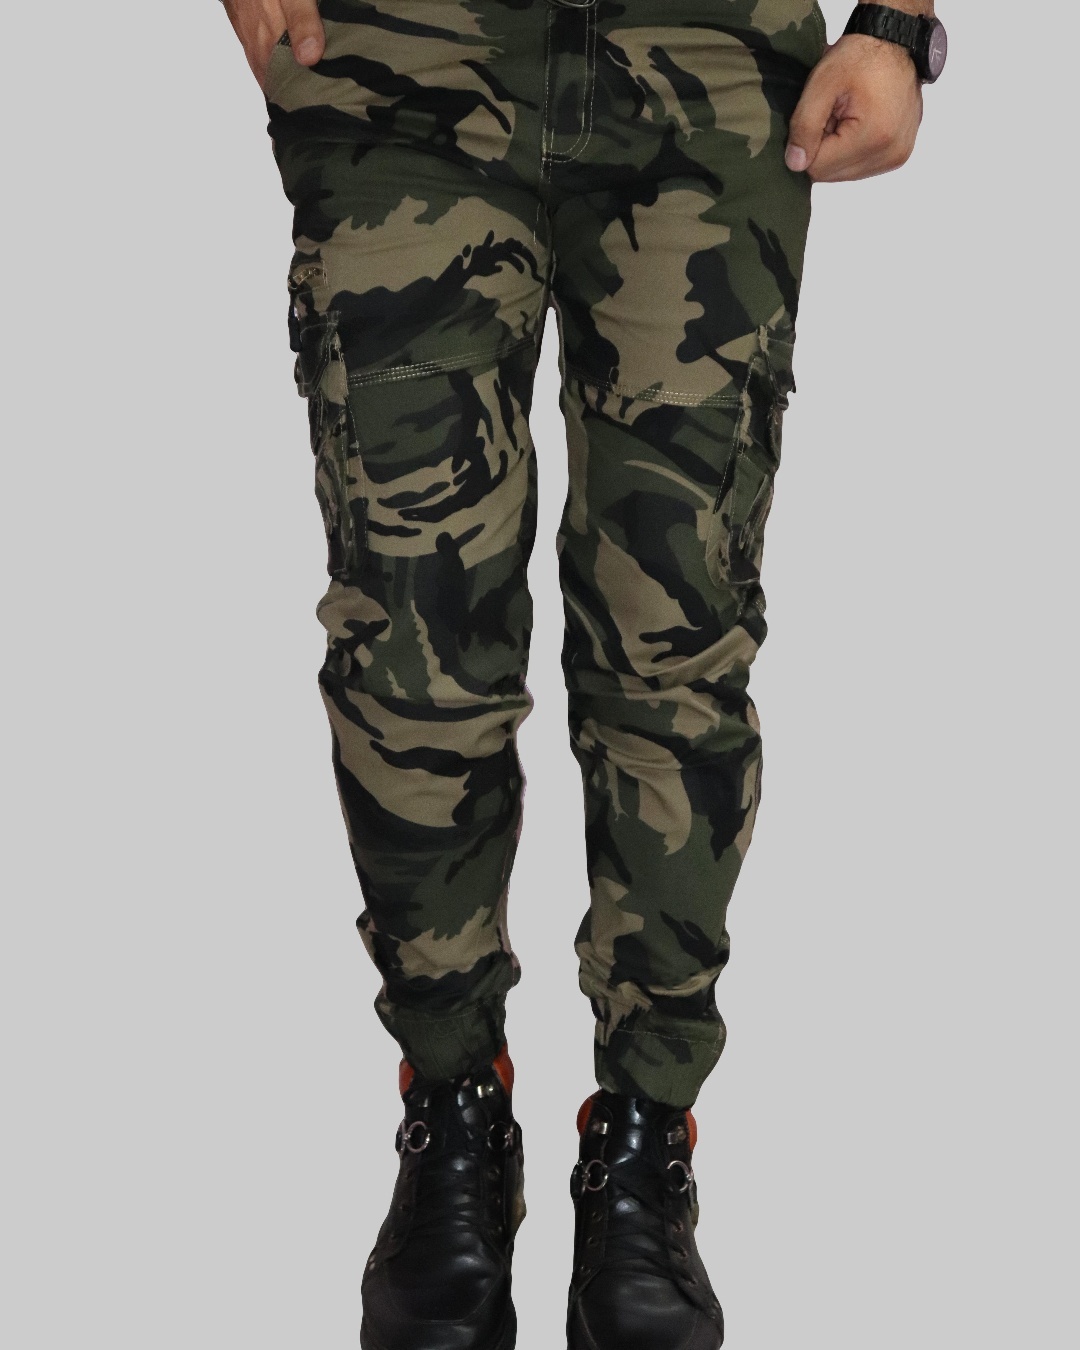 Men's Camo Cargo Pants Classic Stretch Regular Fit Ankle Length Hunting Pant  Casual Multi Pockets Military Army Work Pants - Walmart.com